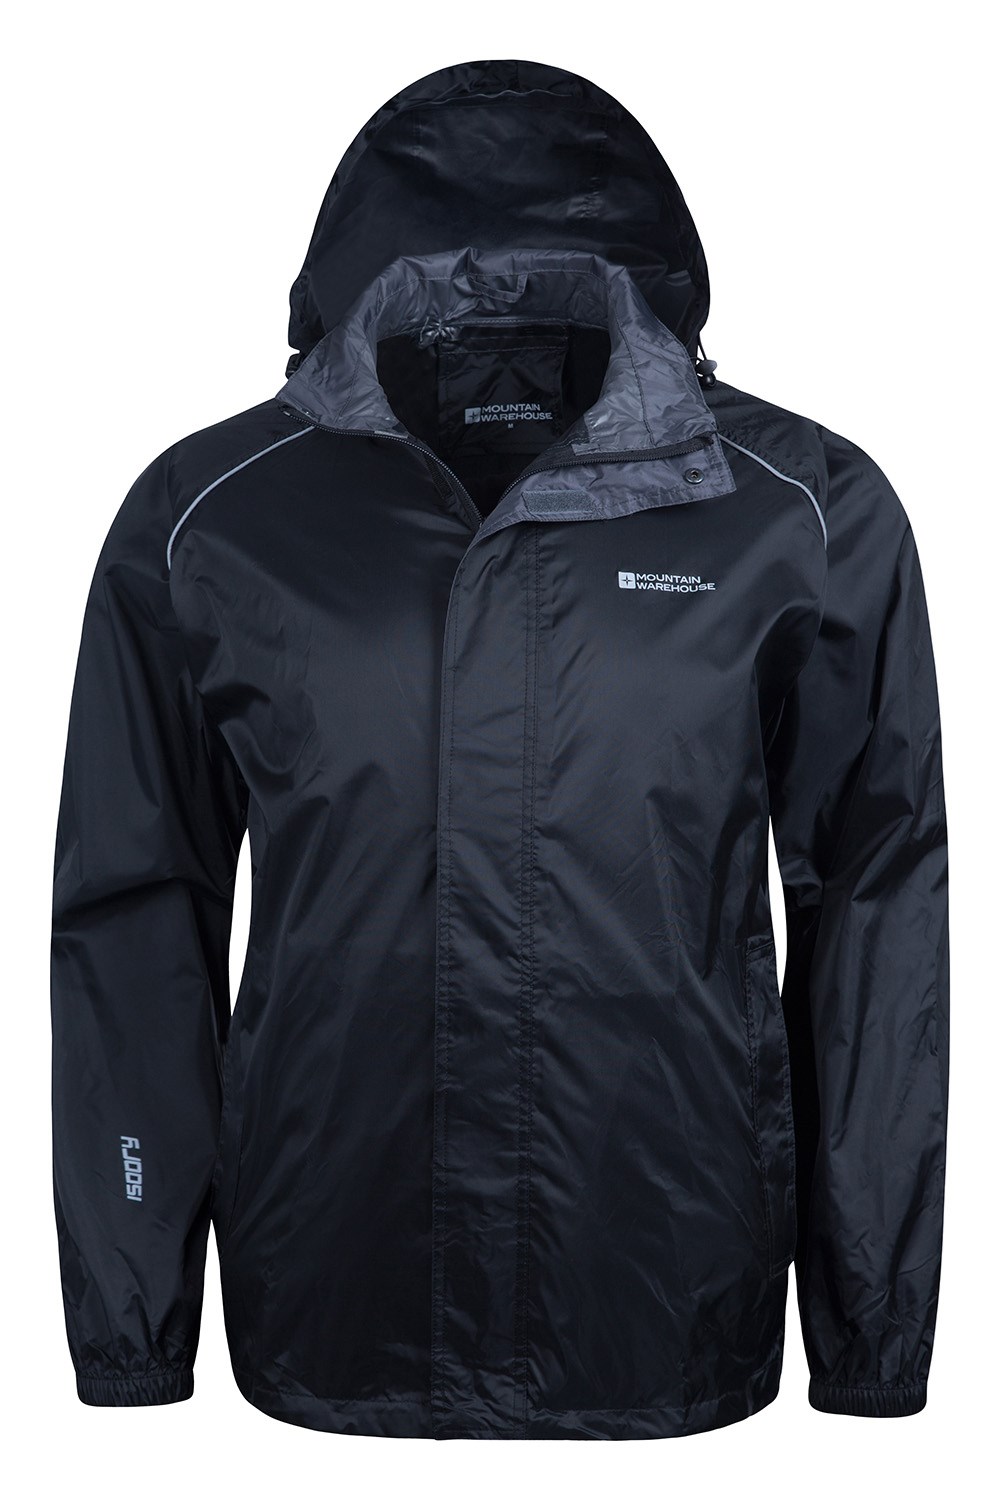 Mountain Warehouse Men's Pakka Jacket with Breathable Membrane and ...